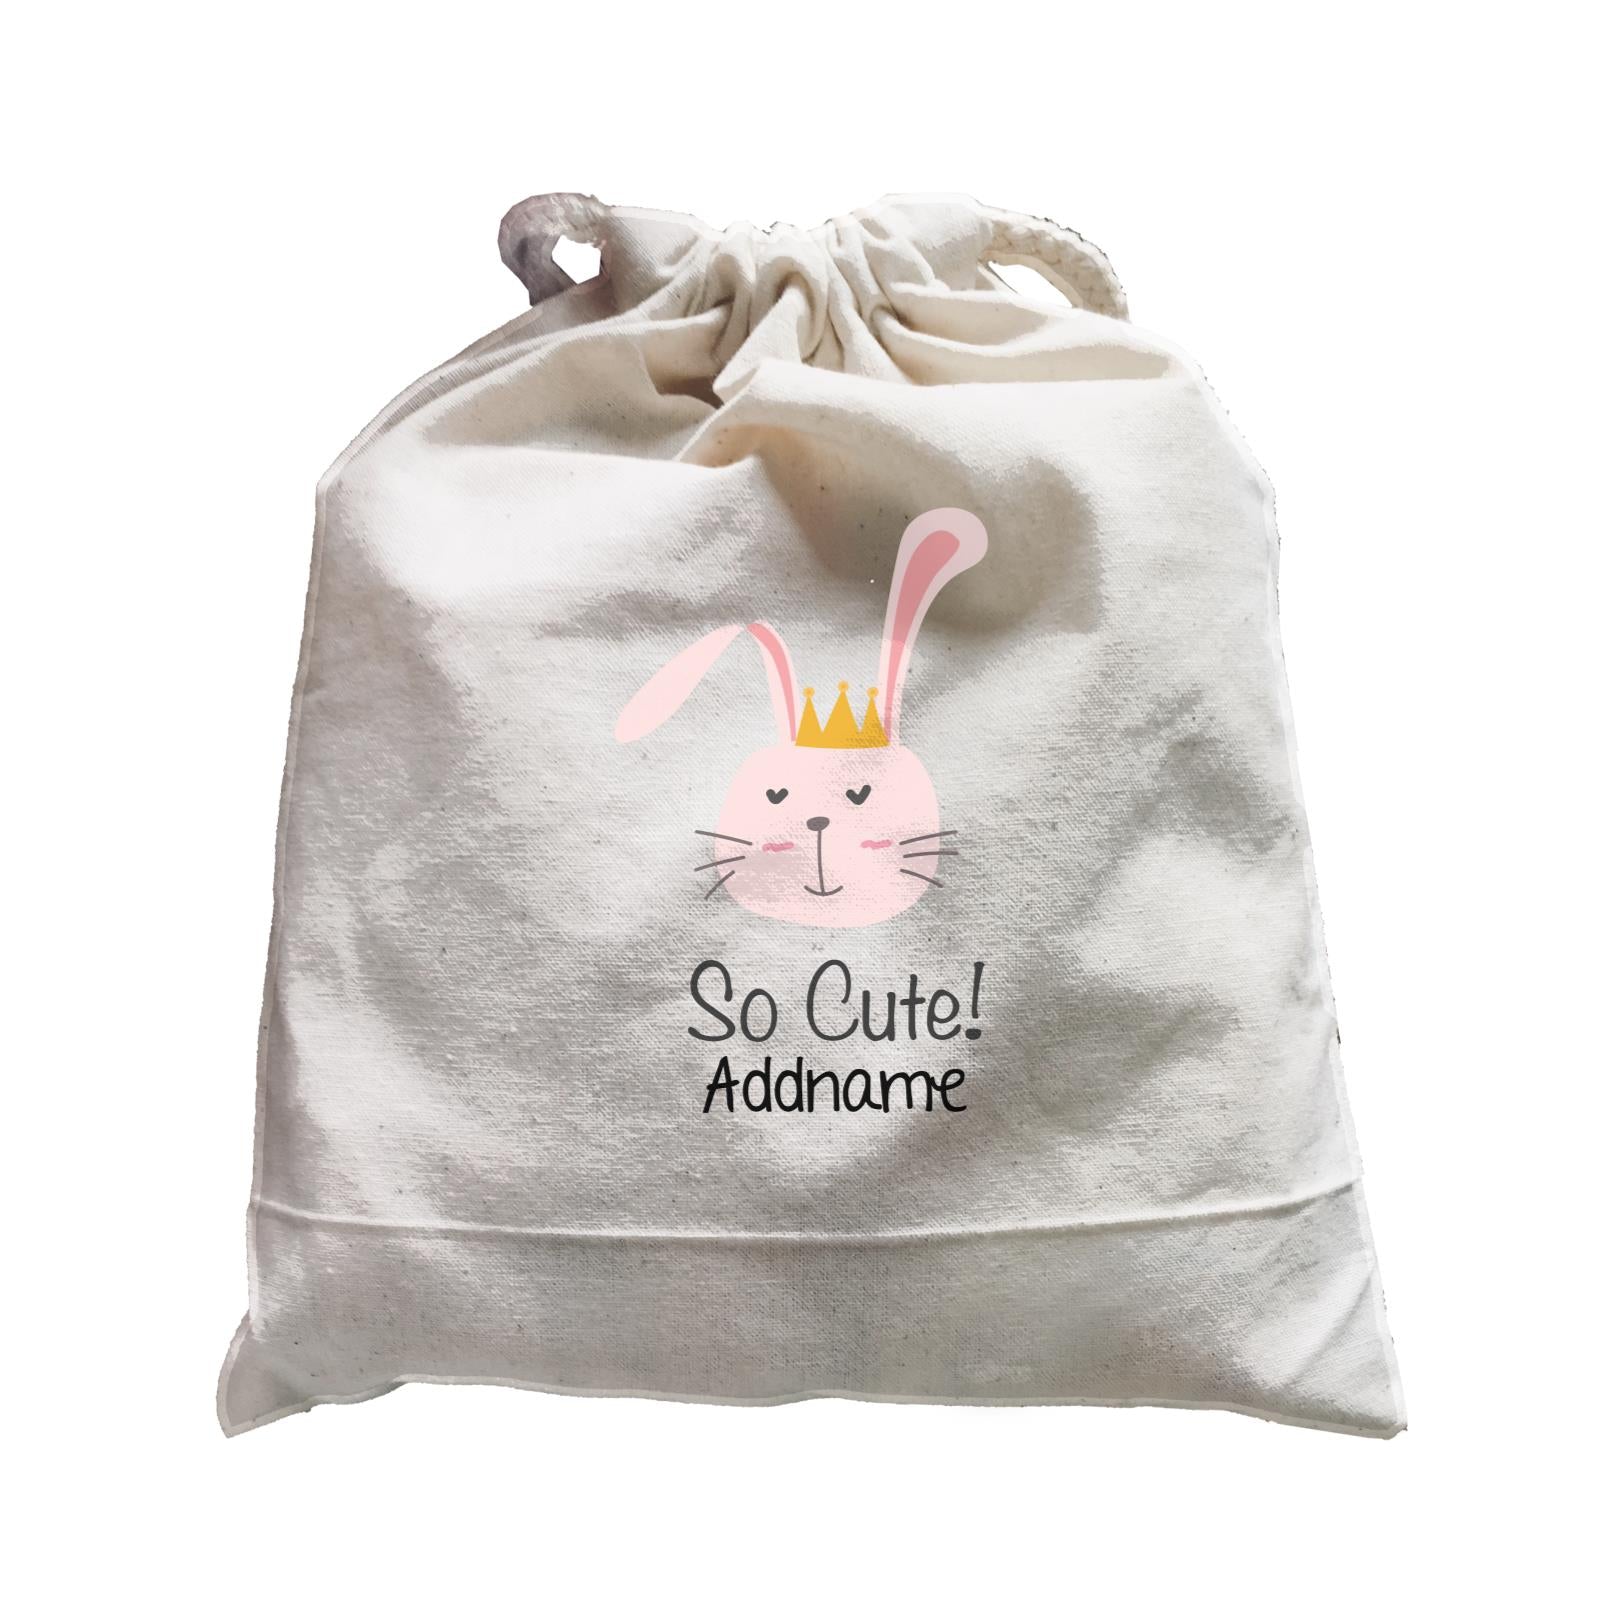 Cute Animals And Friends Series Cute Love Bunny With Crown Addname Satchel